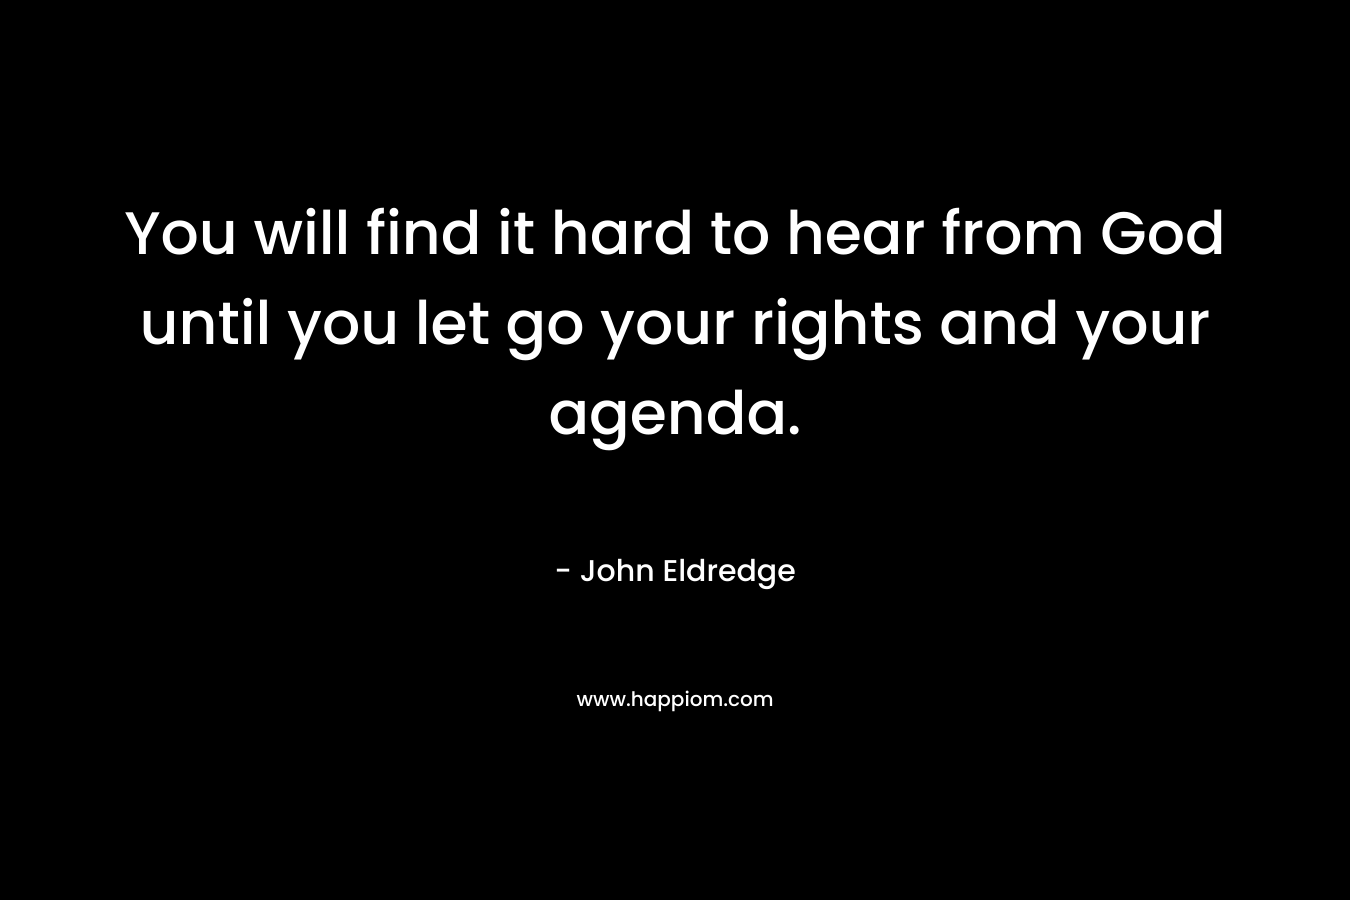 You will find it hard to hear from God until you let go your rights and your agenda.